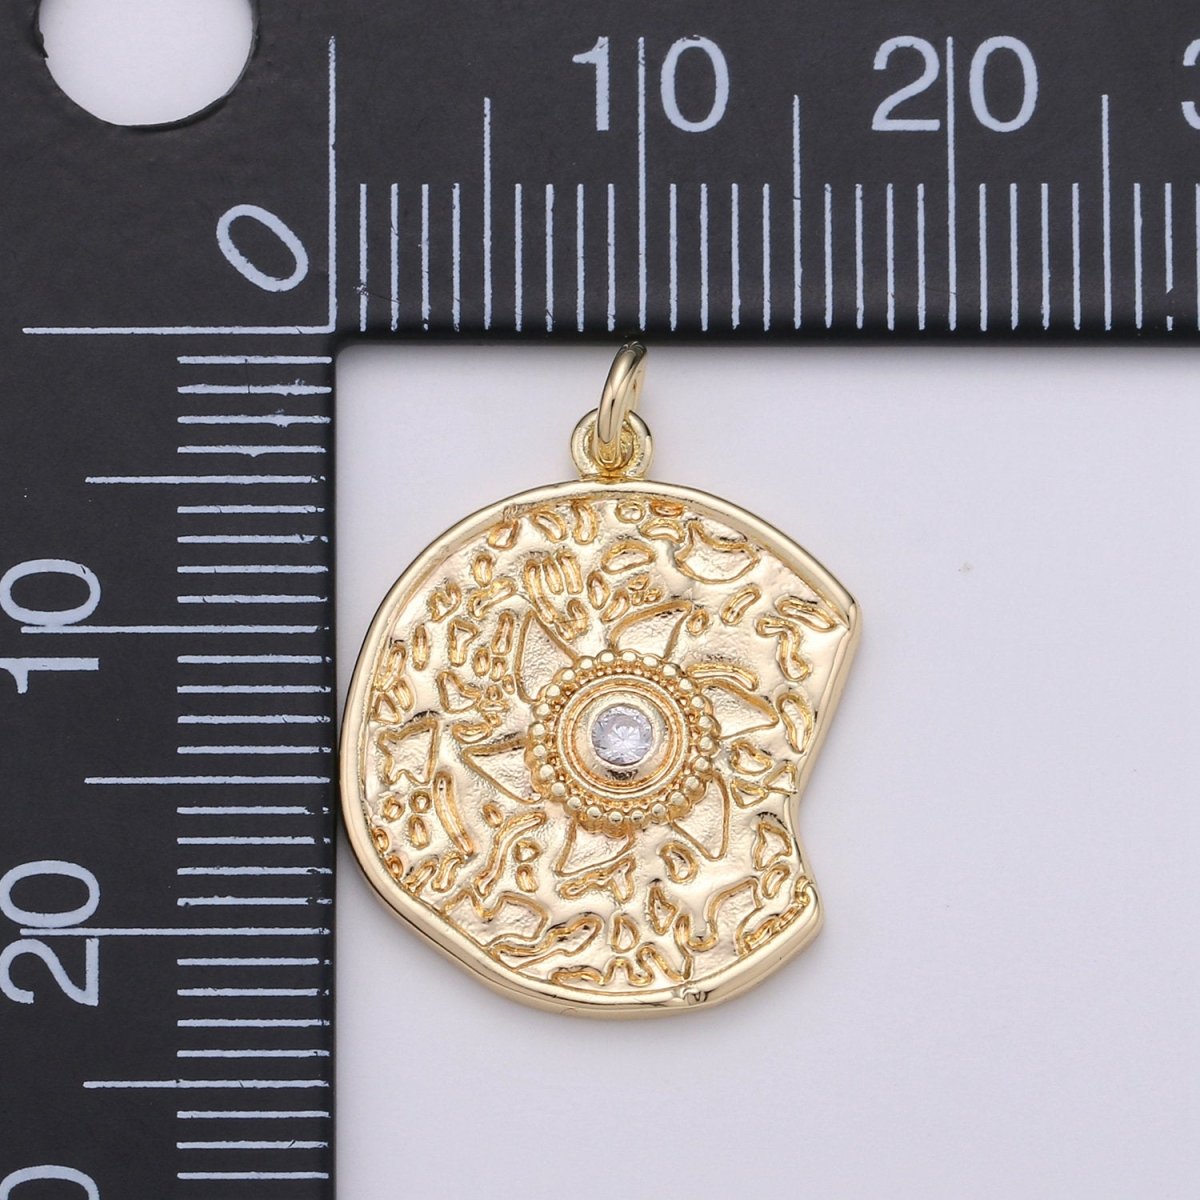 Rustic Coin Charm 14k Gold Filled coin pendant, Medallion charms Sun coin charms, Celestial Disc Charm for Necklace Bracelet Earring D-403 - DLUXCA